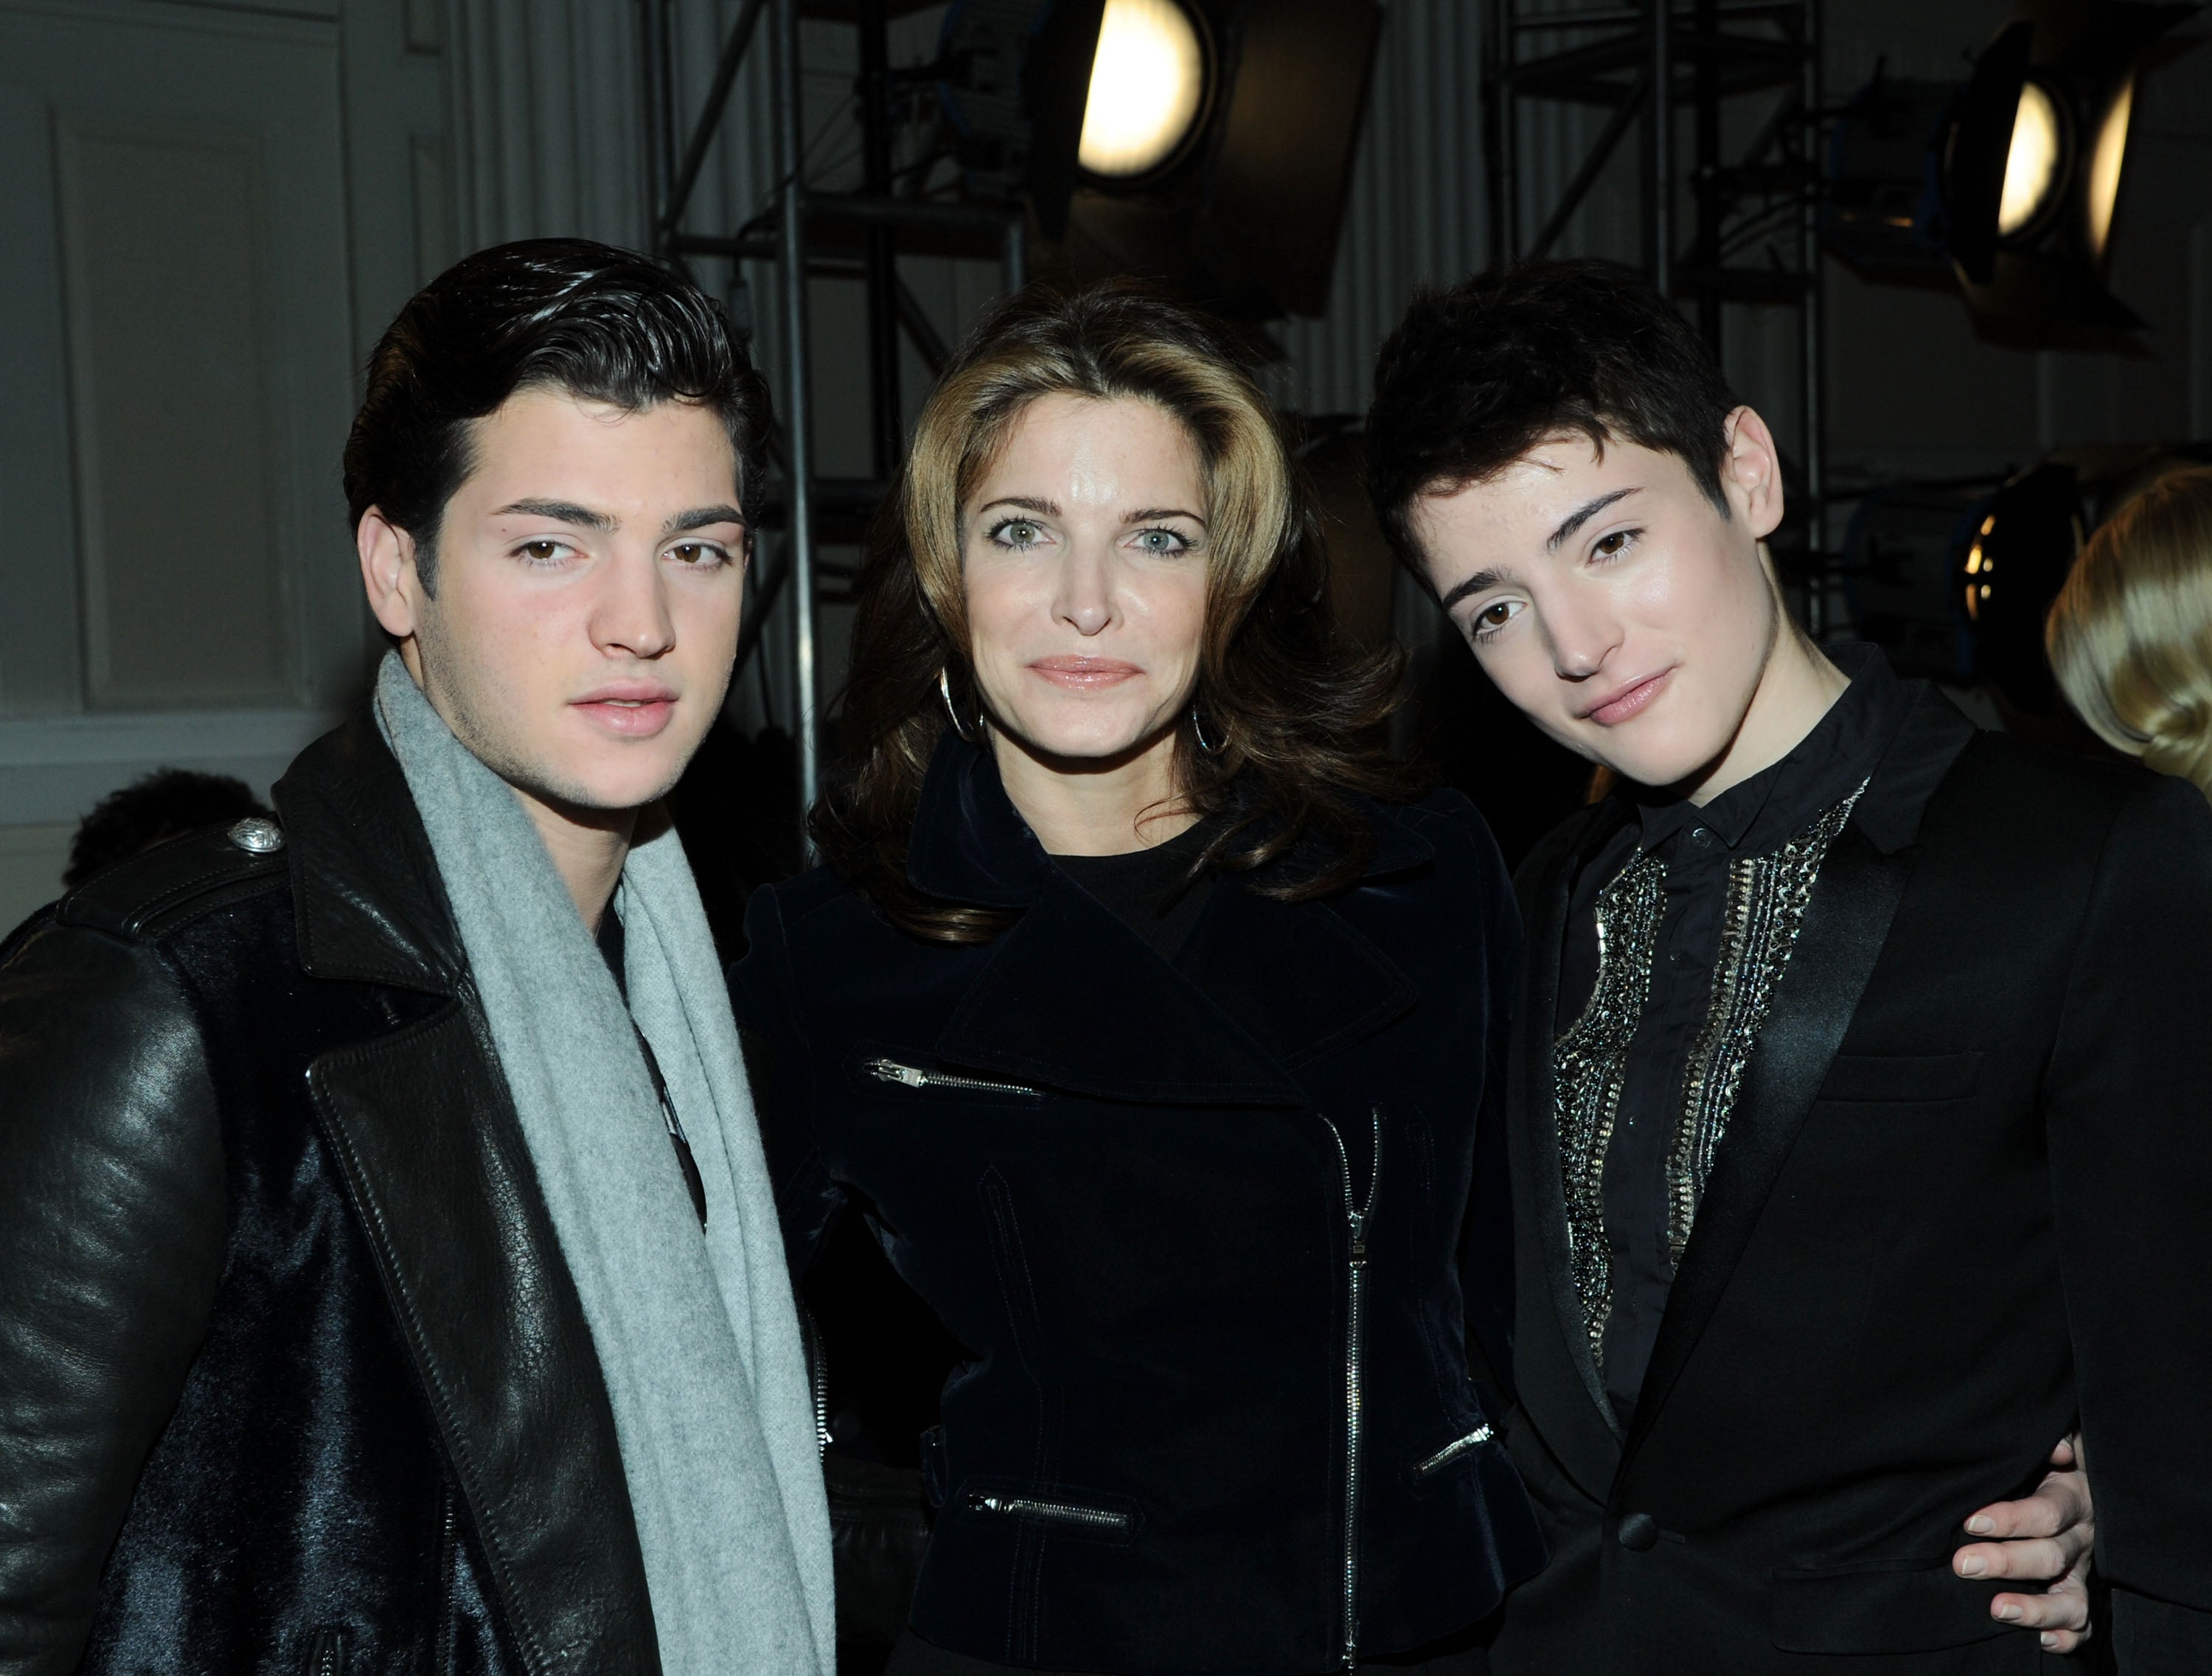 Peter Brant, Stephanie Seymour and Harry Brant attend the Jason Wu fall 2013 fashion show during Mercedes-Benz Fashion Week on February 8, 2013